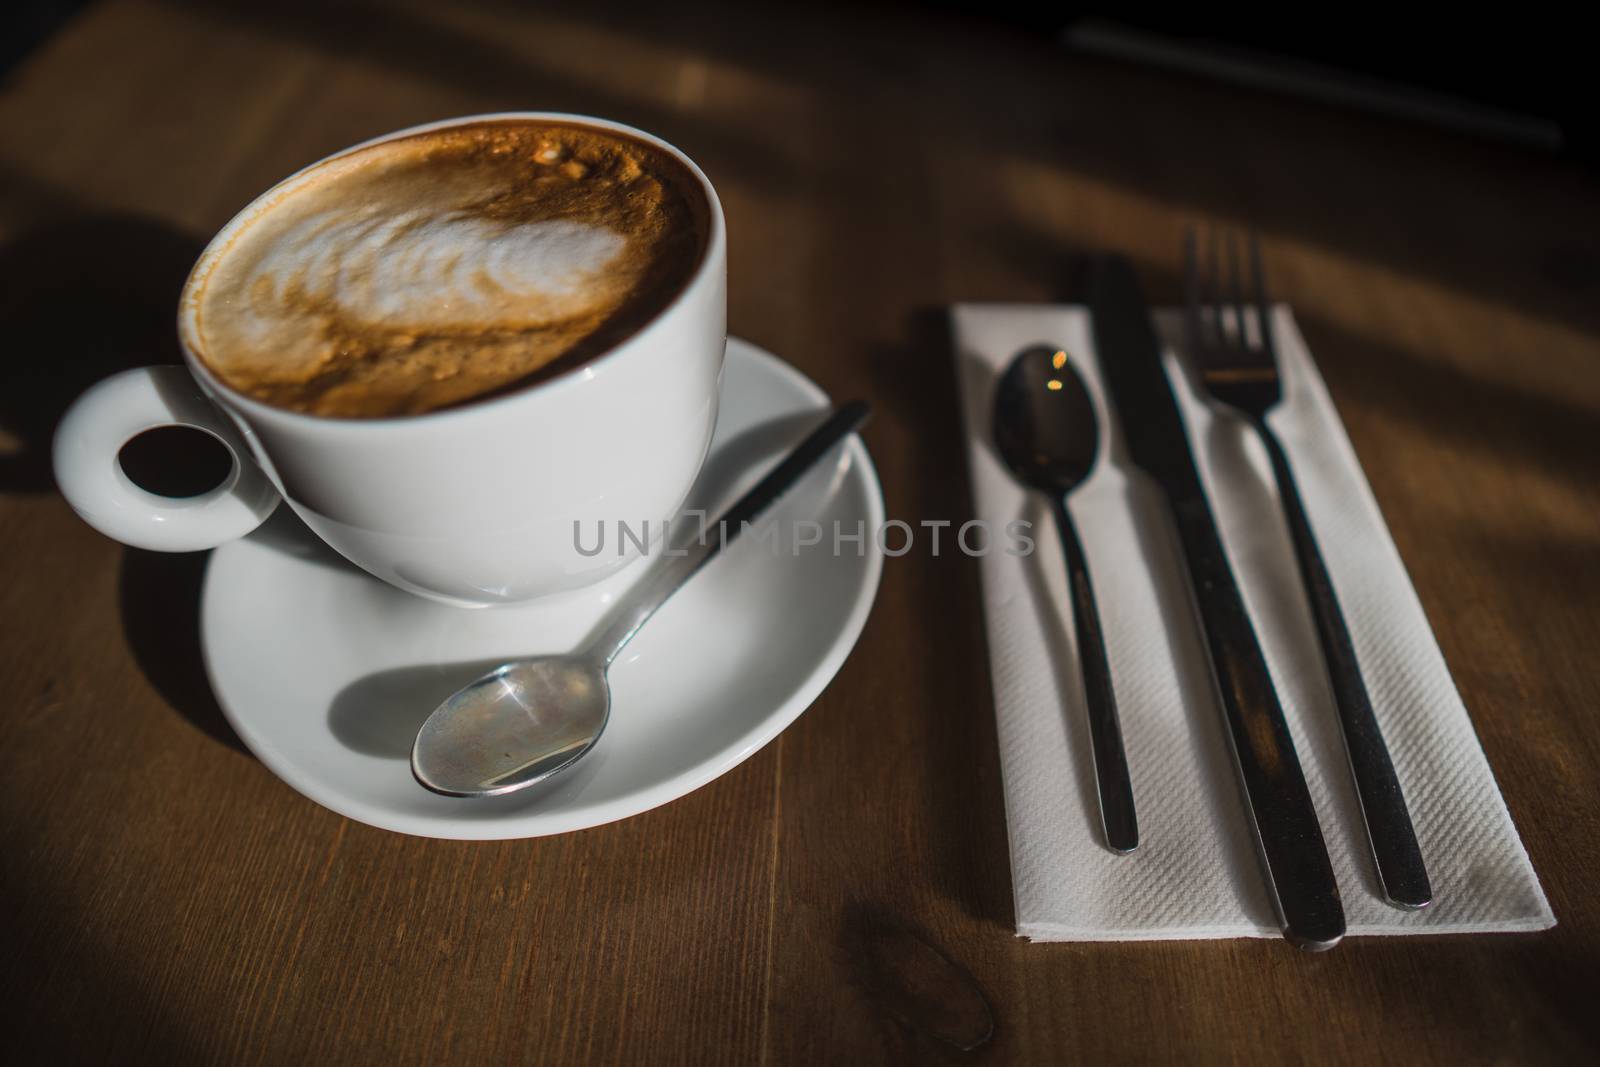 A cup of cappuccino coffee on a wooden table in a cafe setting